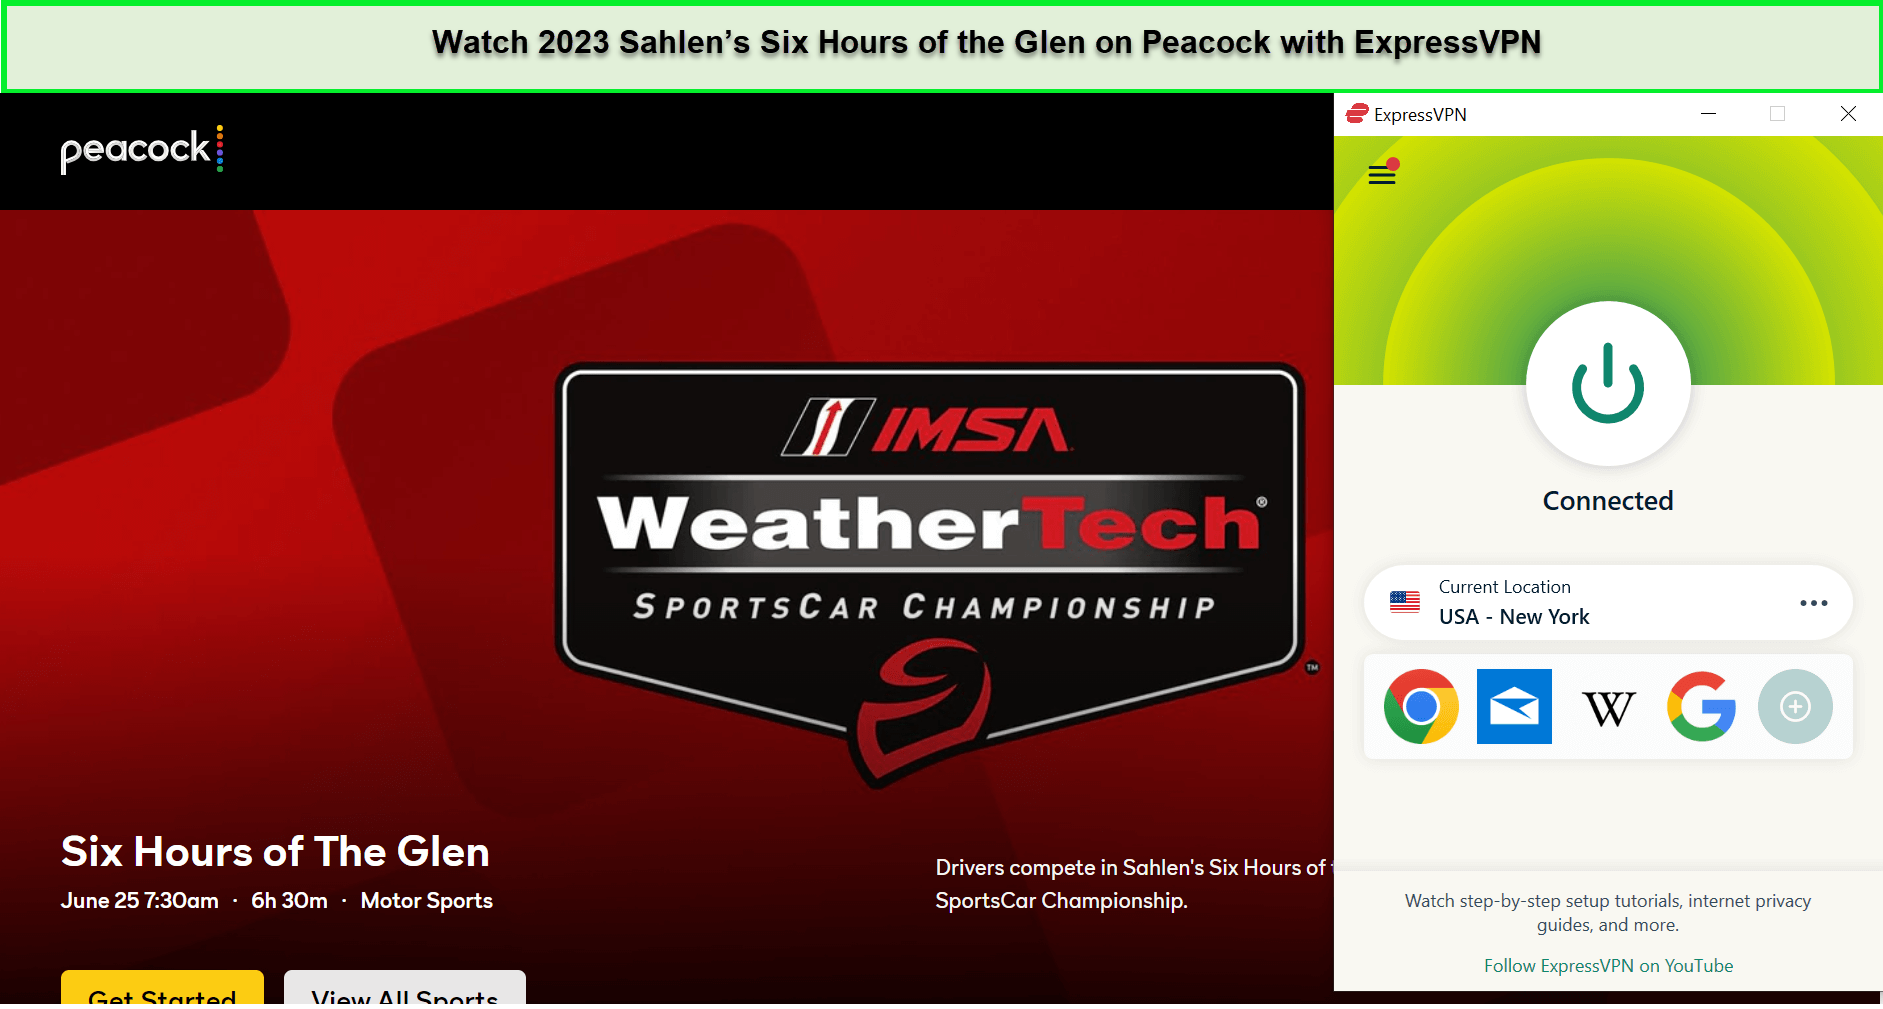 Watch-2023-Sahlens-Six-Hours-of-the-Glen-in-Singapore-on-Peacock-with-ExpressVPN